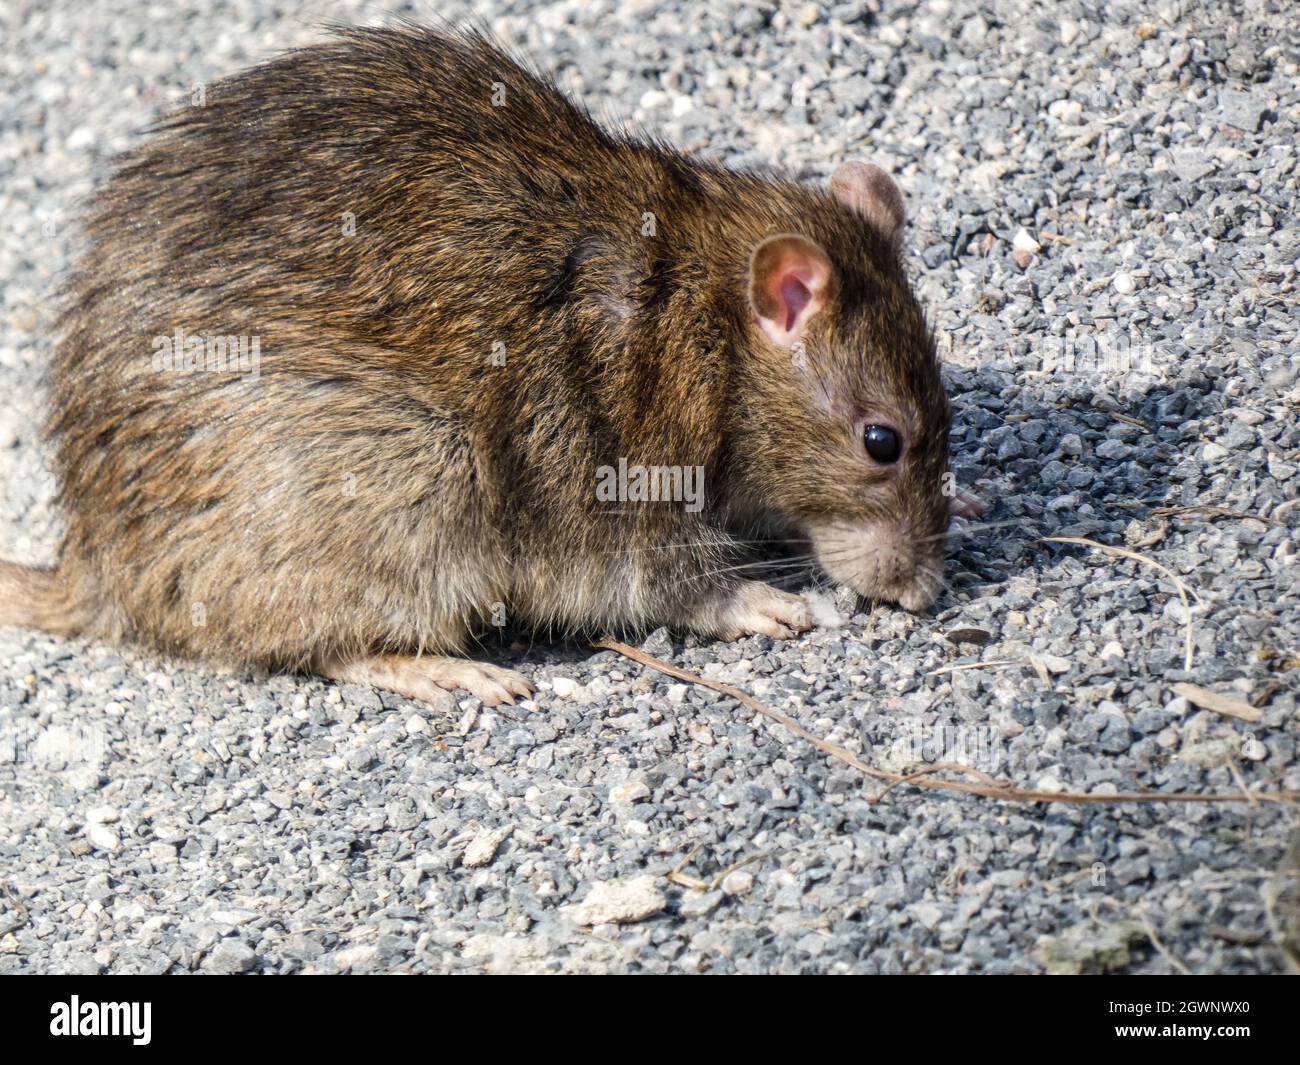 High Angle View Of Rat On Foot Path Stock Photo